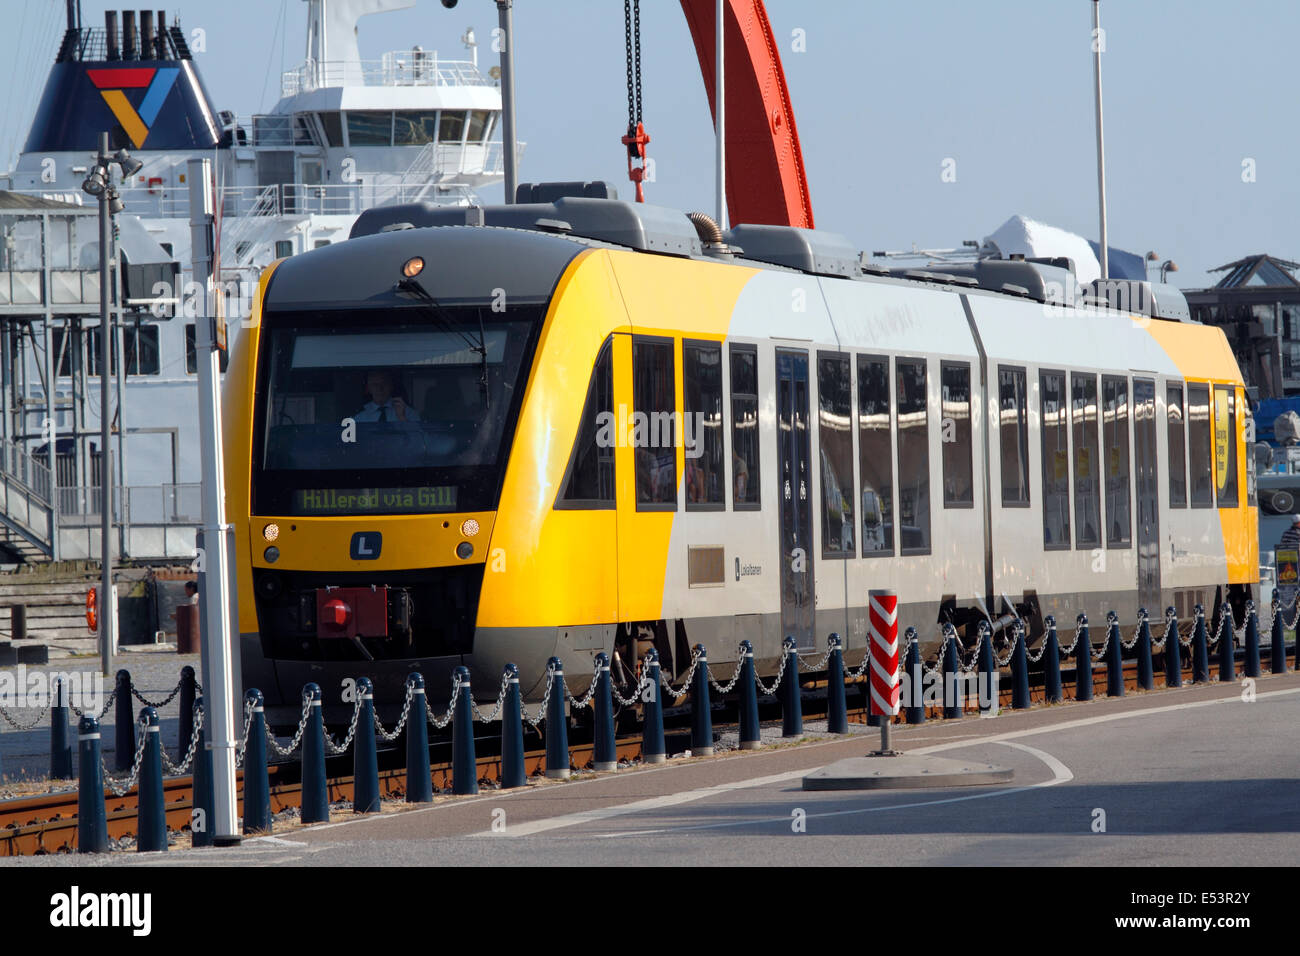 Local train to Gilleleje and Hillerød and Scandlines ferry to Sweden on the busy harbour area in the harbour of Elsinore, Helsingør, Sealand, Denmark. Stock Photo